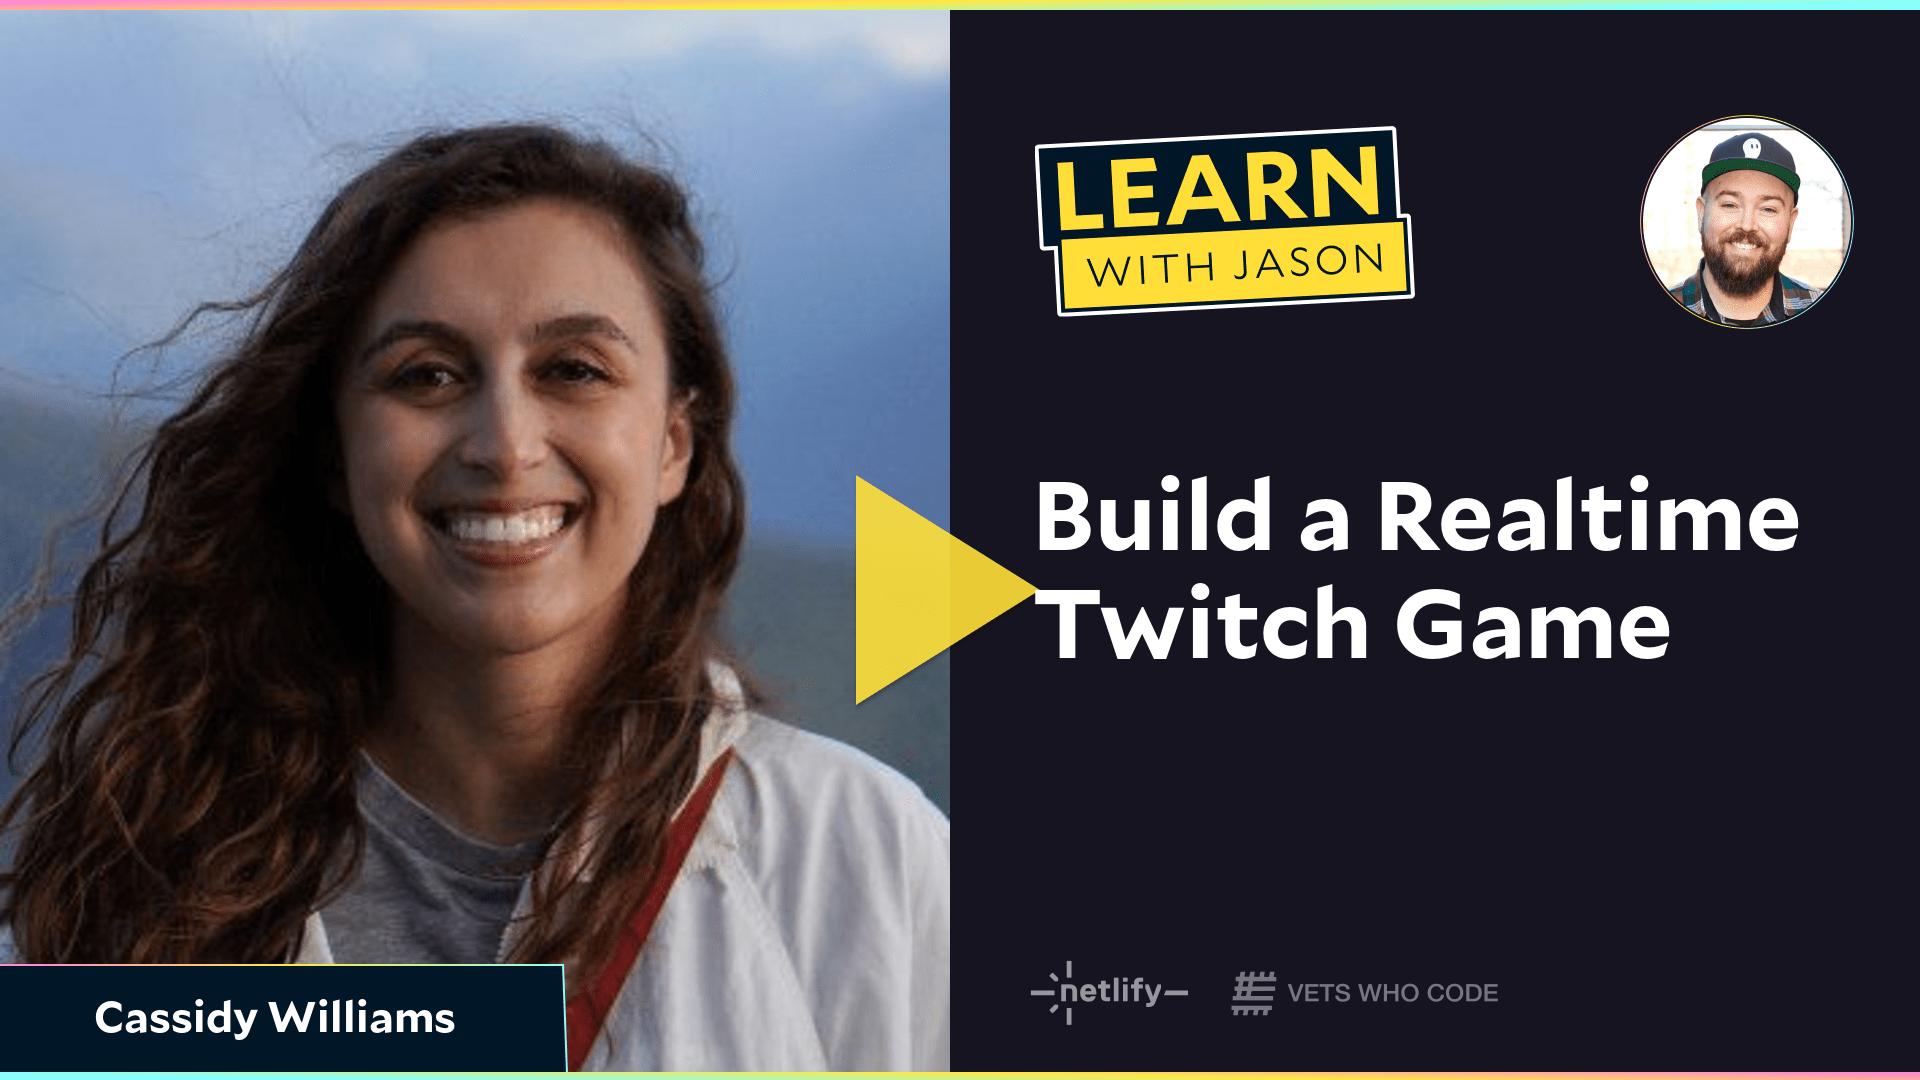 Build a Realtime Twitch Game (with Cassidy Williams)